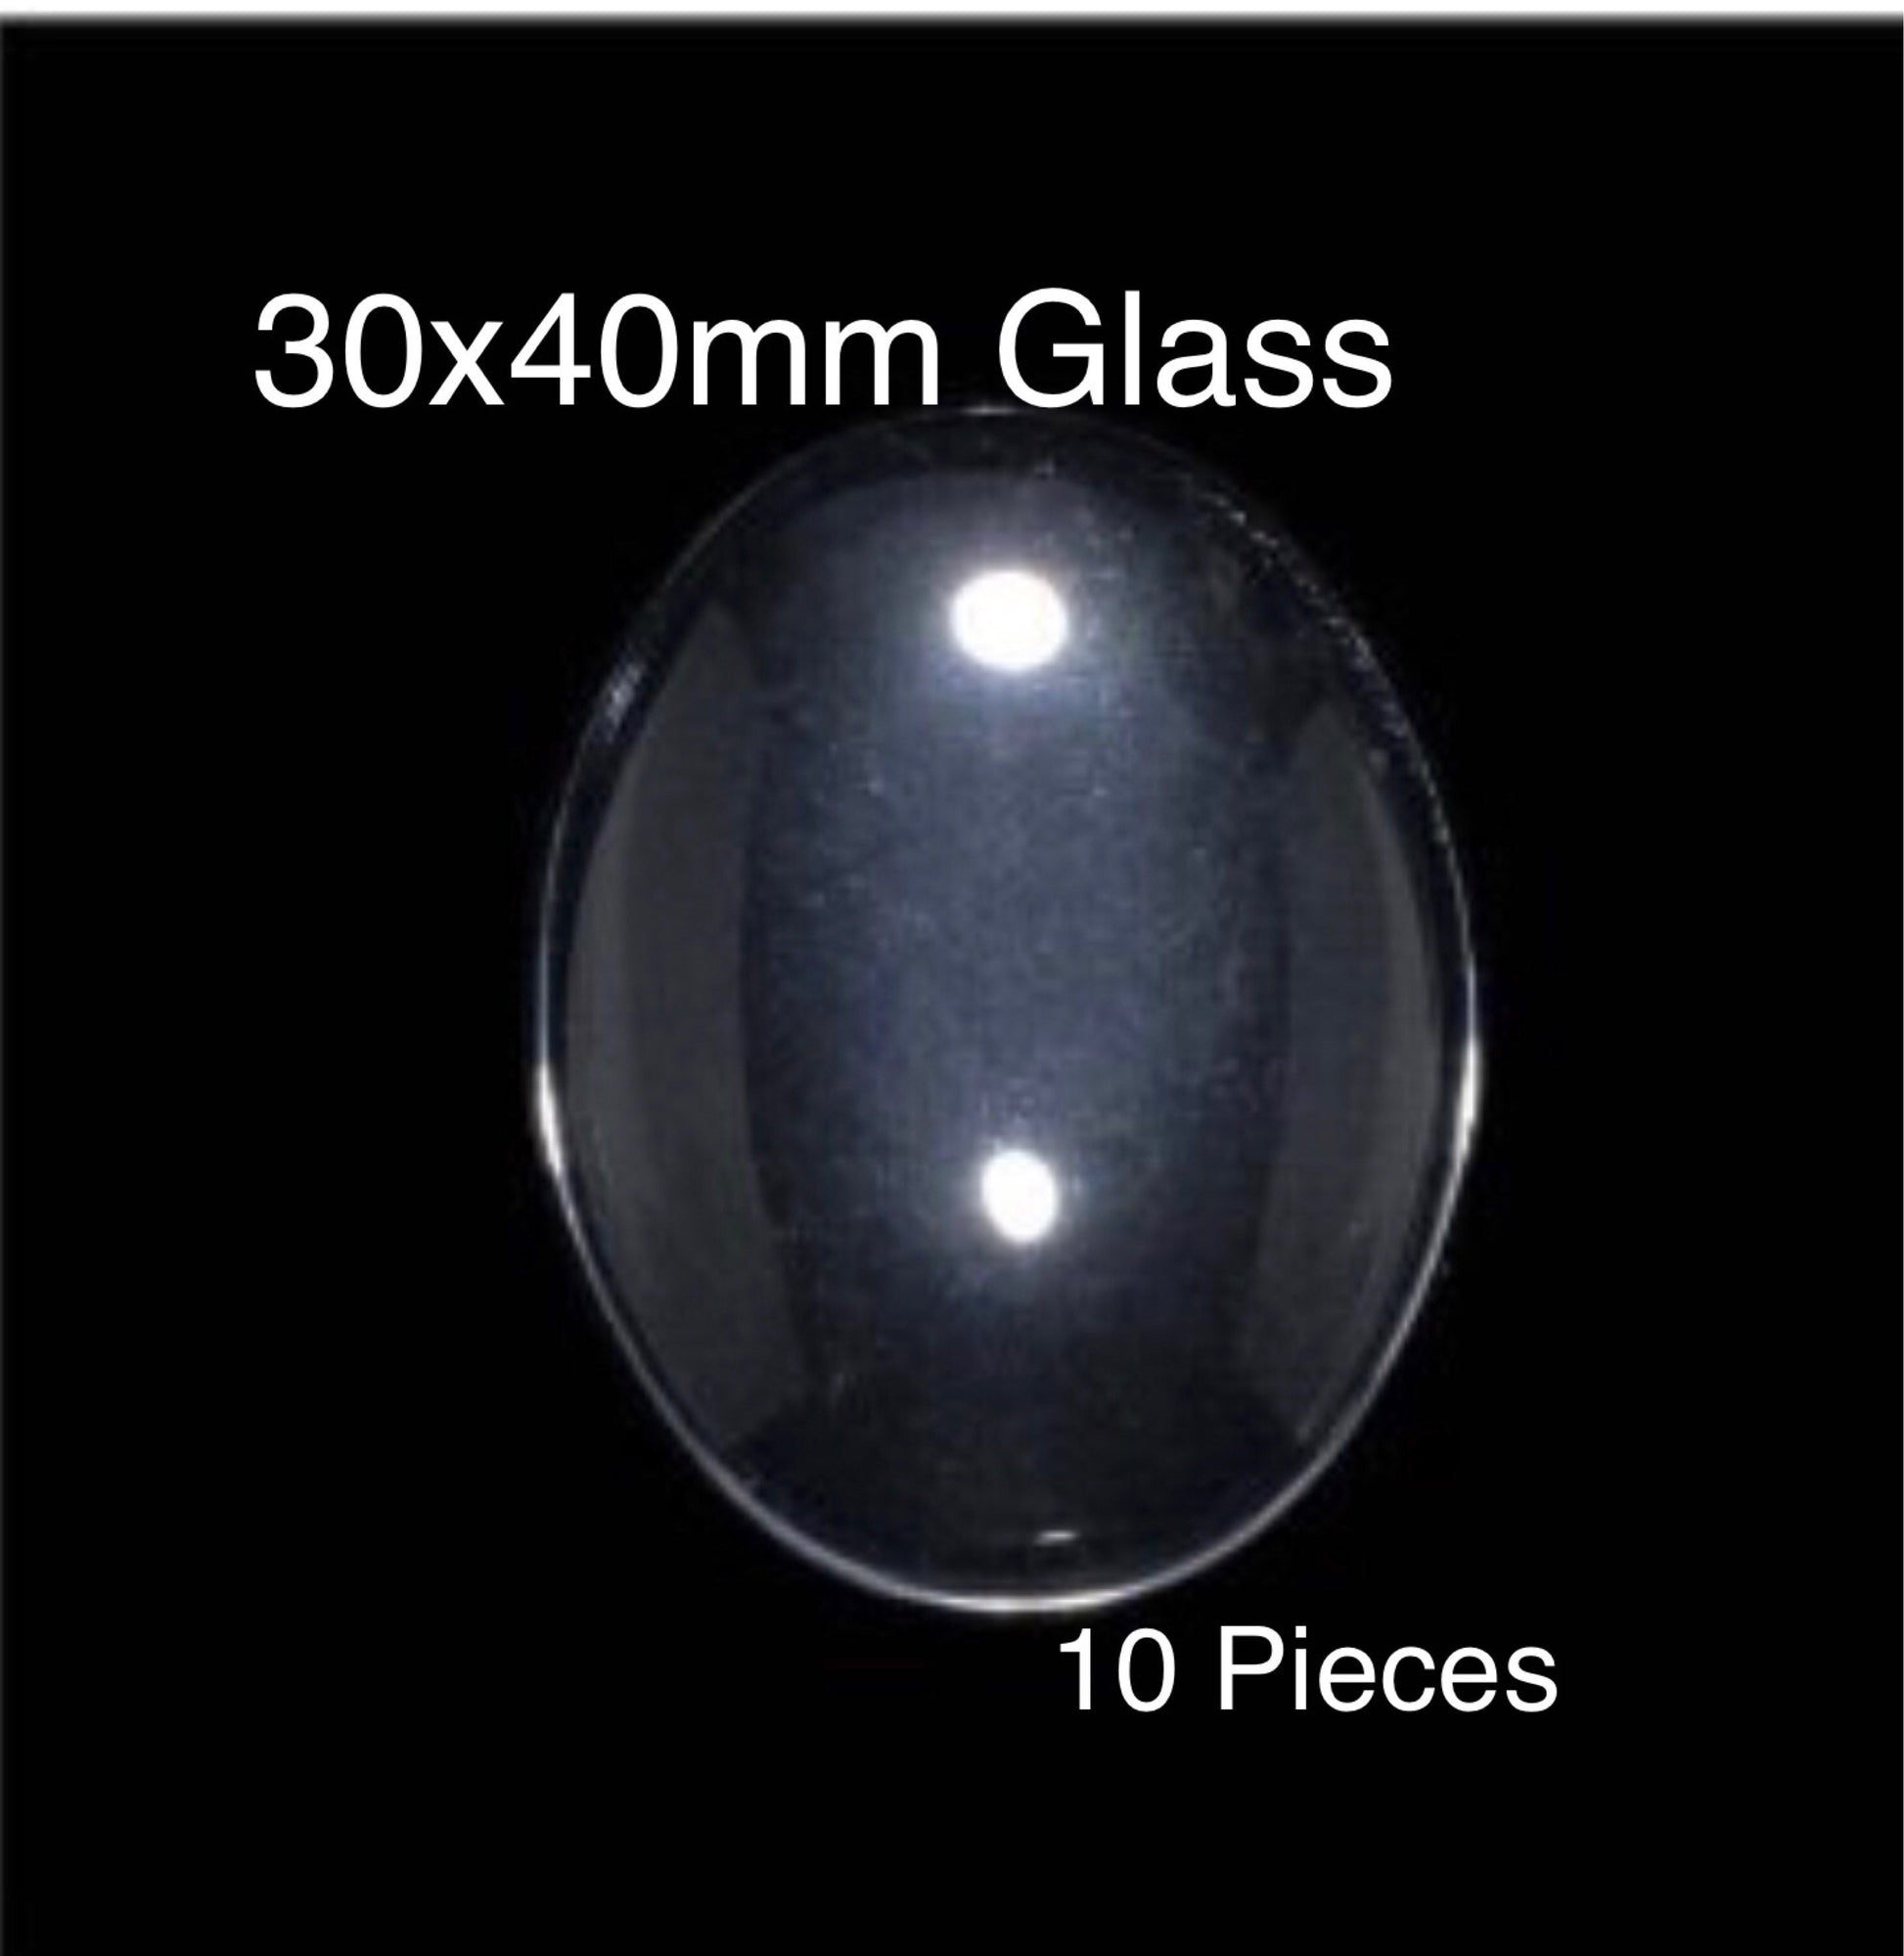 Oval Glass Clear domed cabochon 30 mm x 40 mm